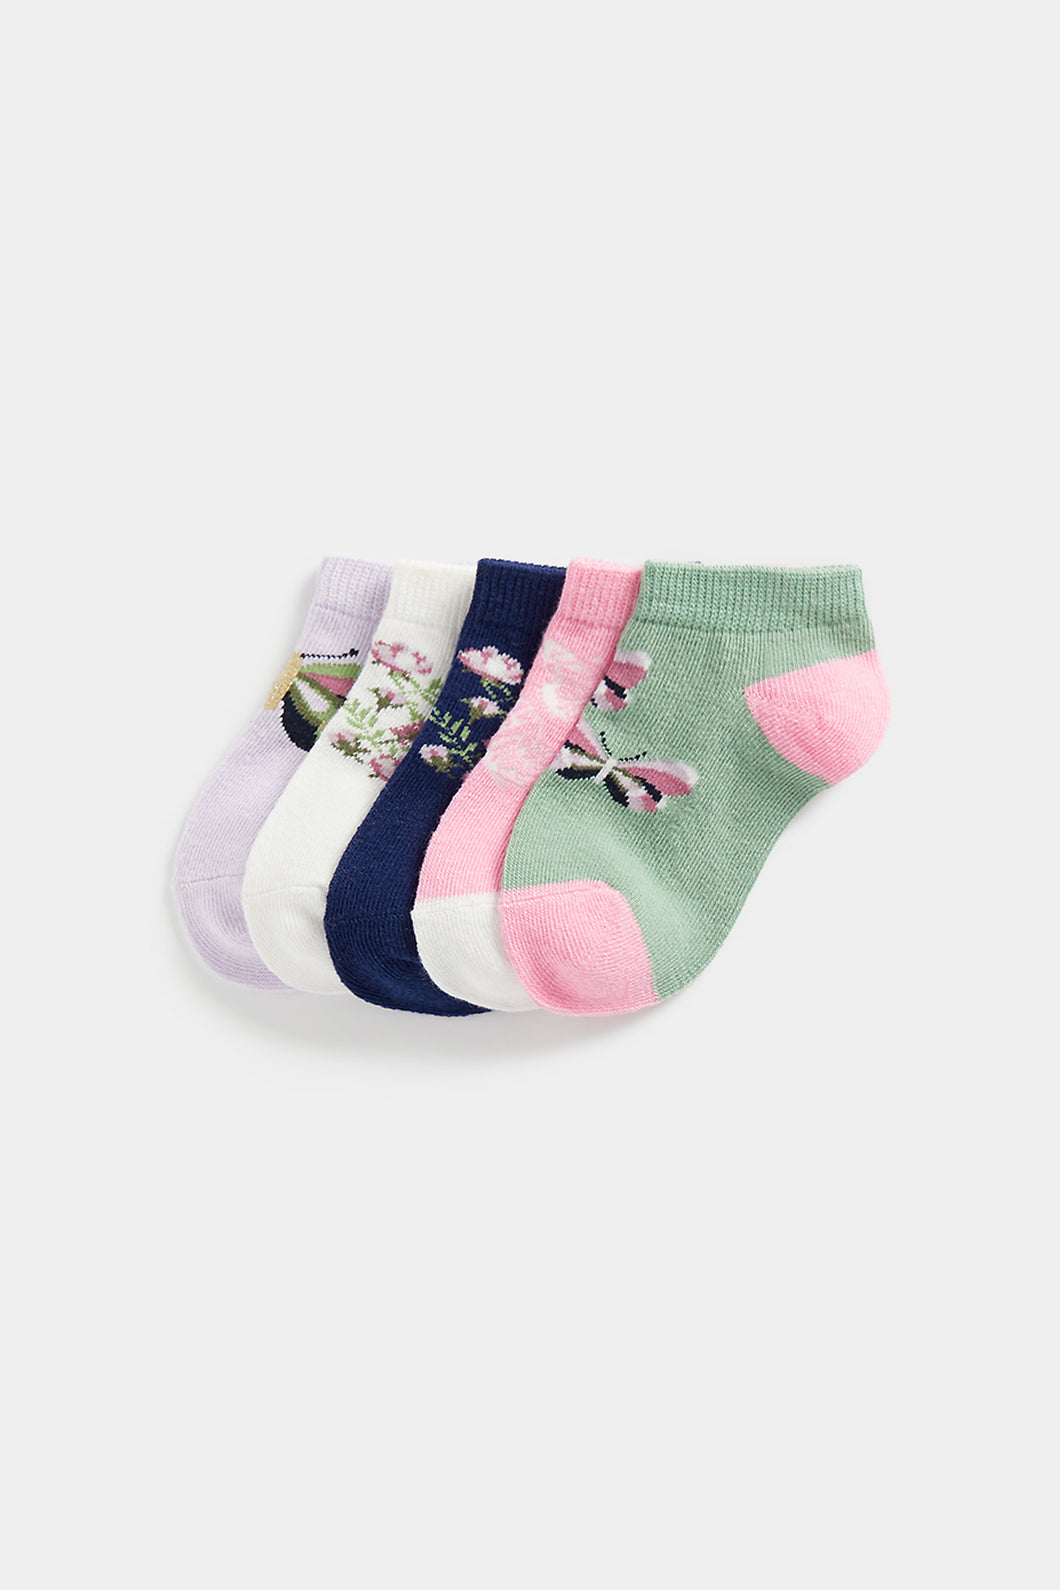 Mothercare Butterfly Trainer Socks - 5 Pack